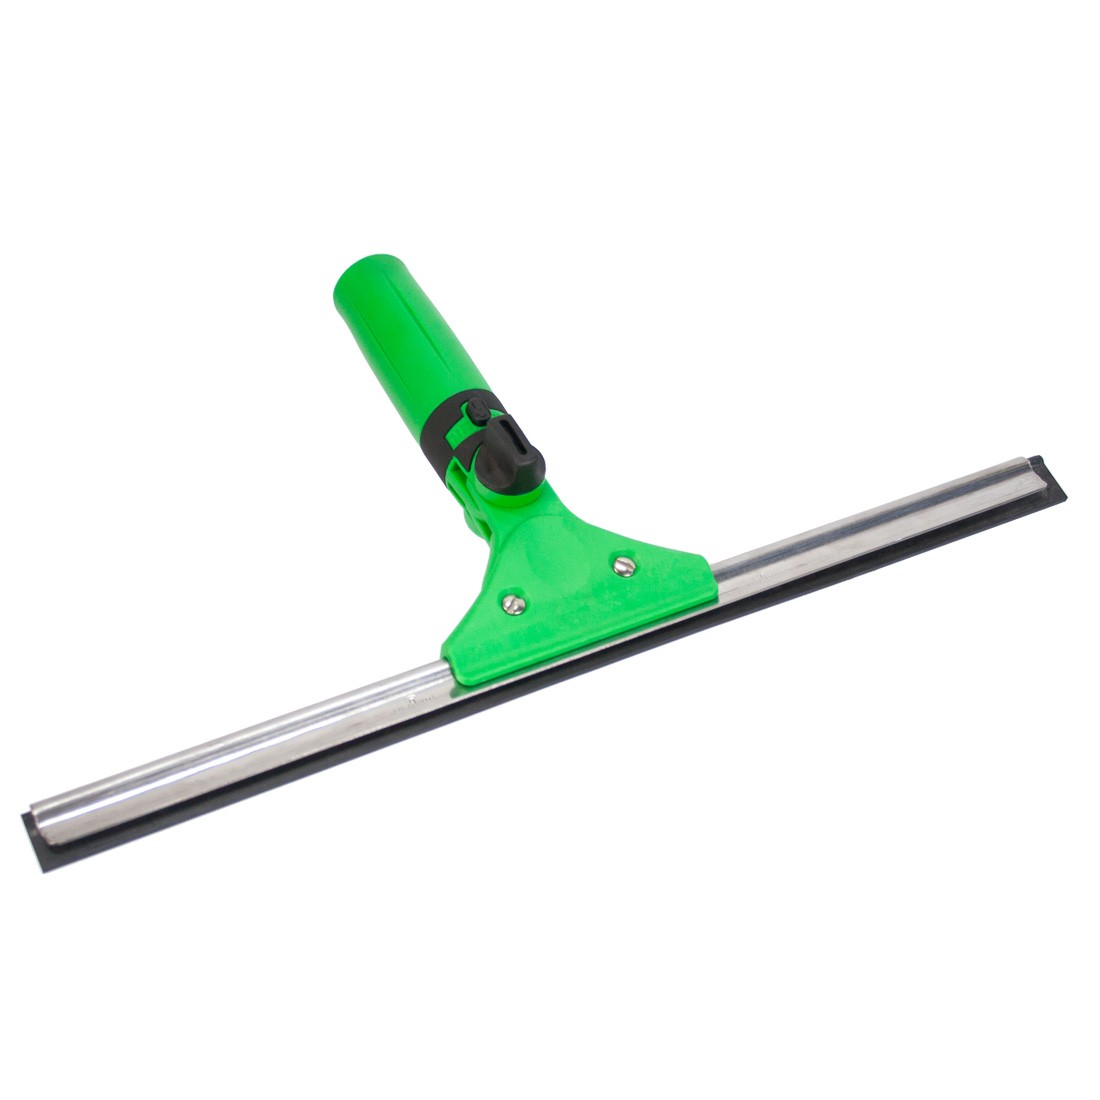 Top 5 Important Things to Know When Choosing a Squeegee